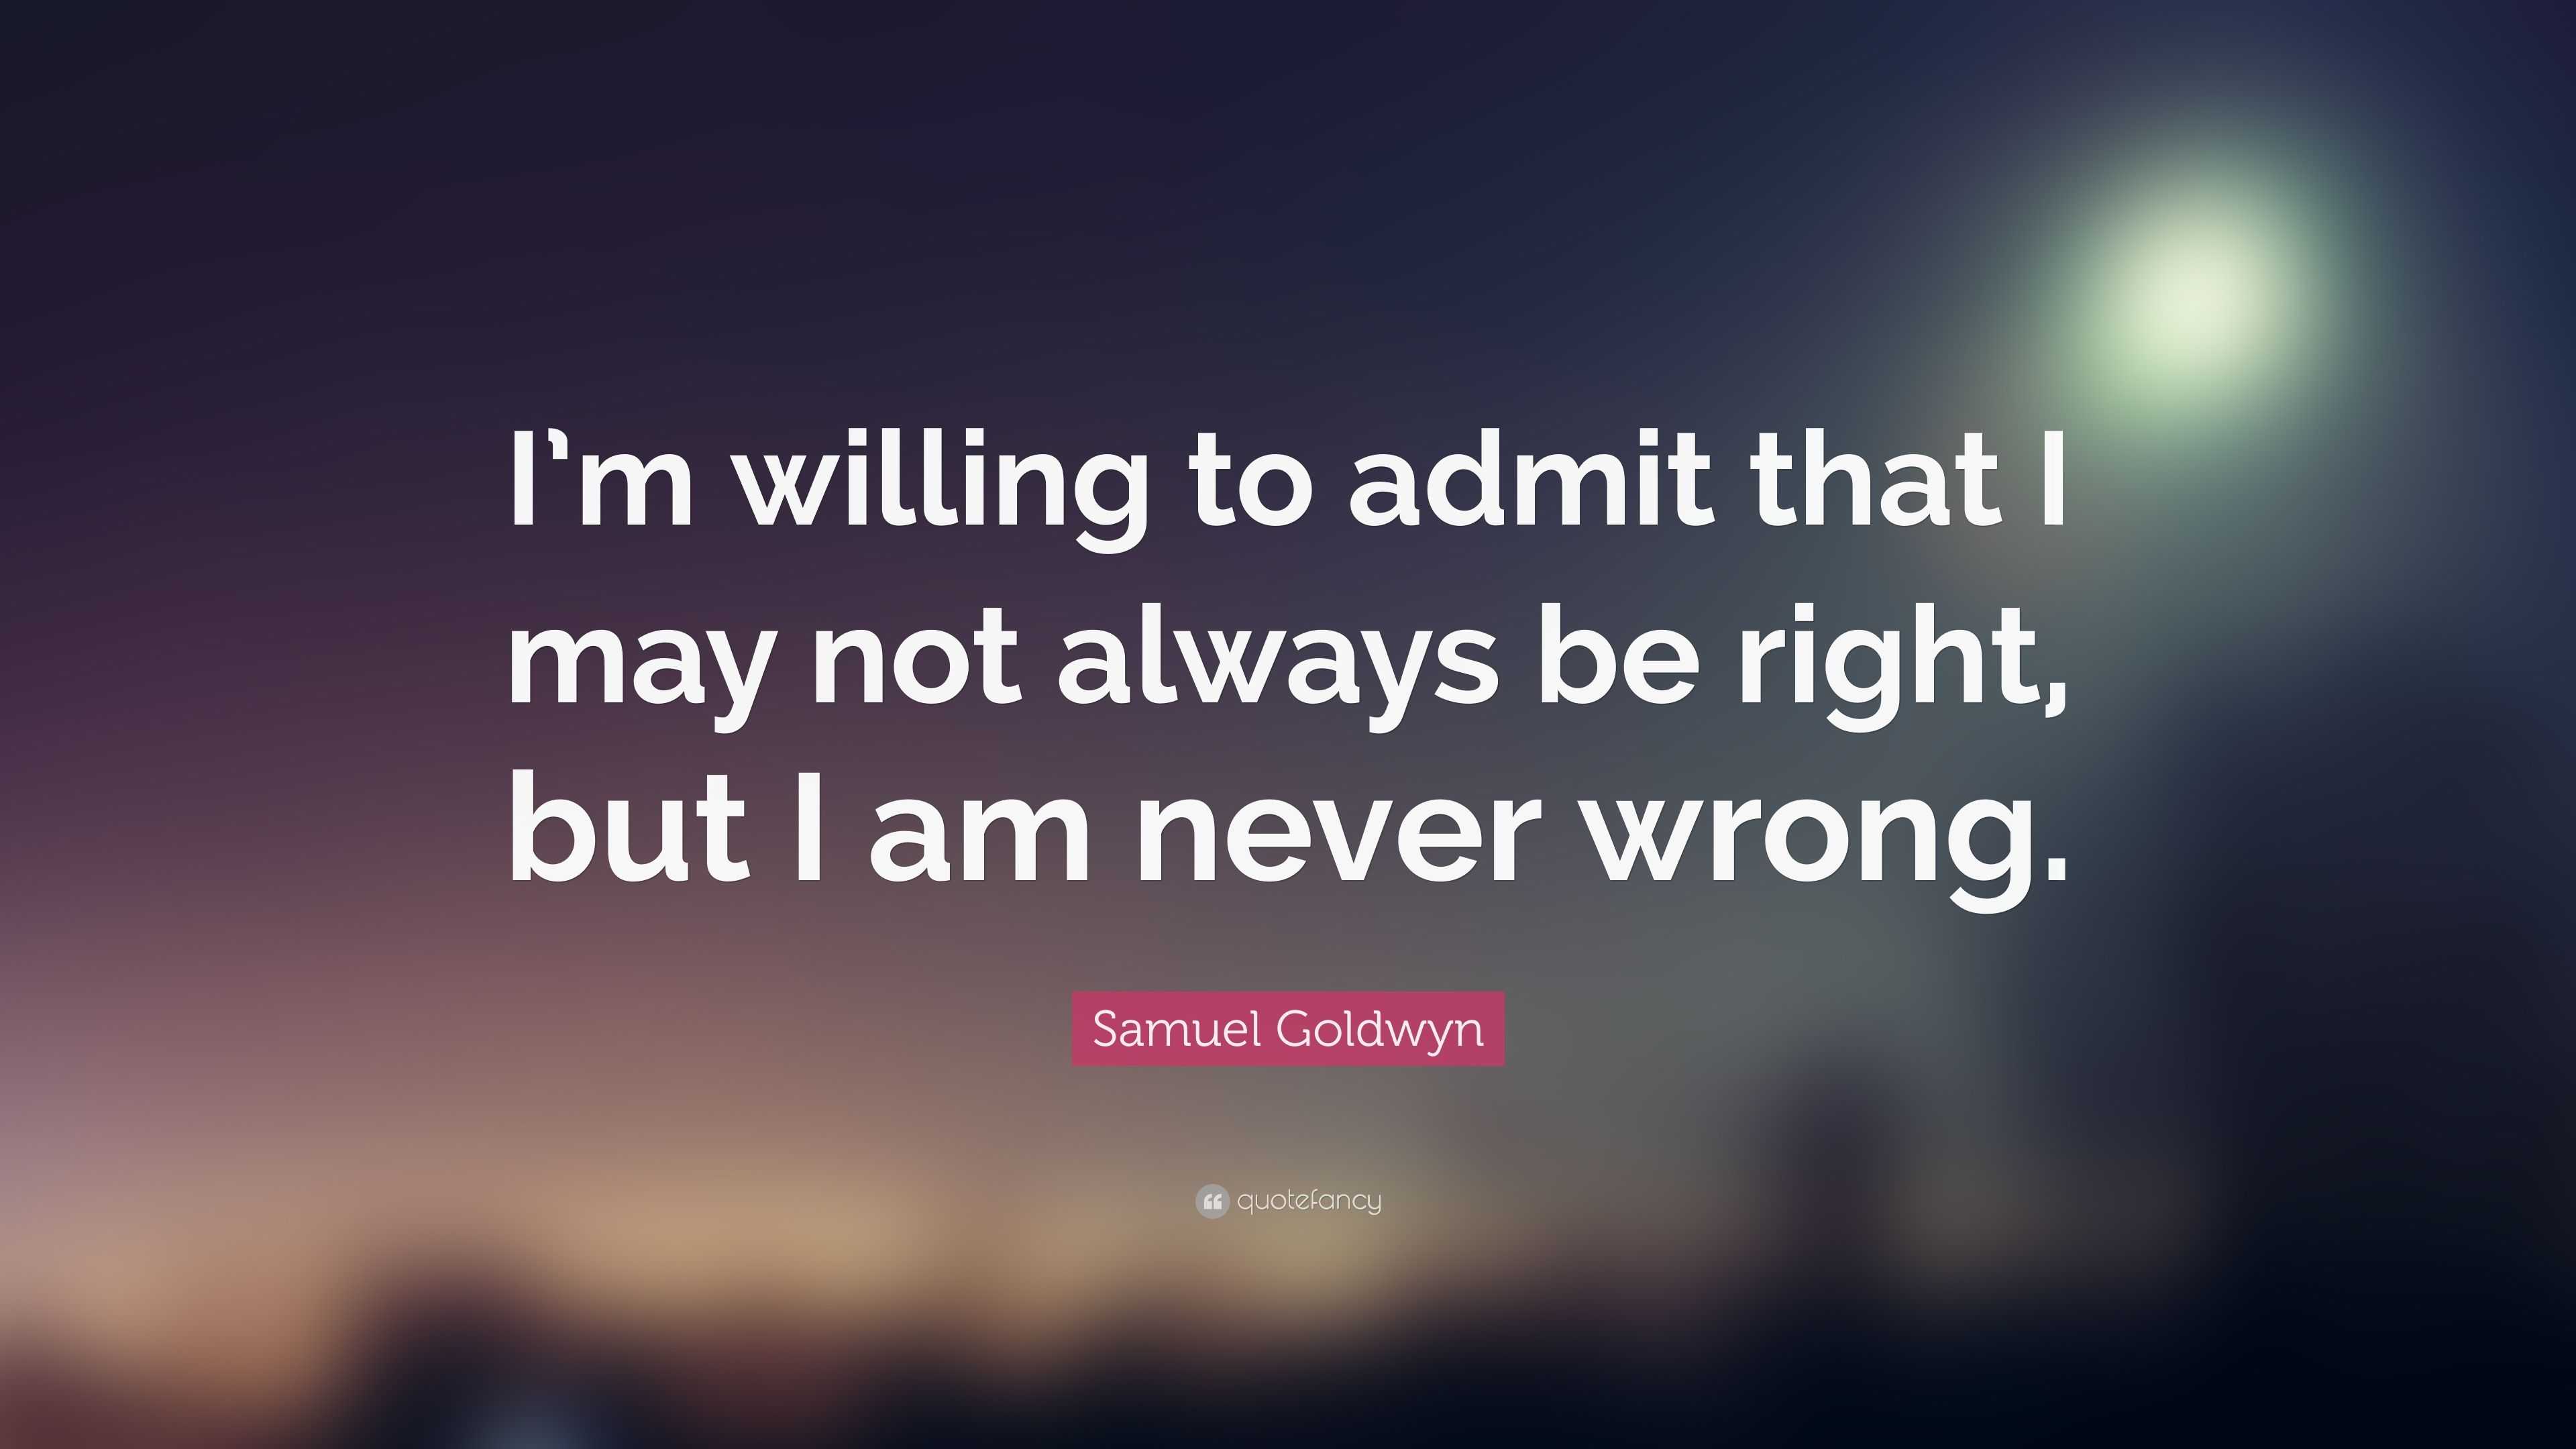 Samuel Goldwyn Quote “I’m willing to admit that I may not always be